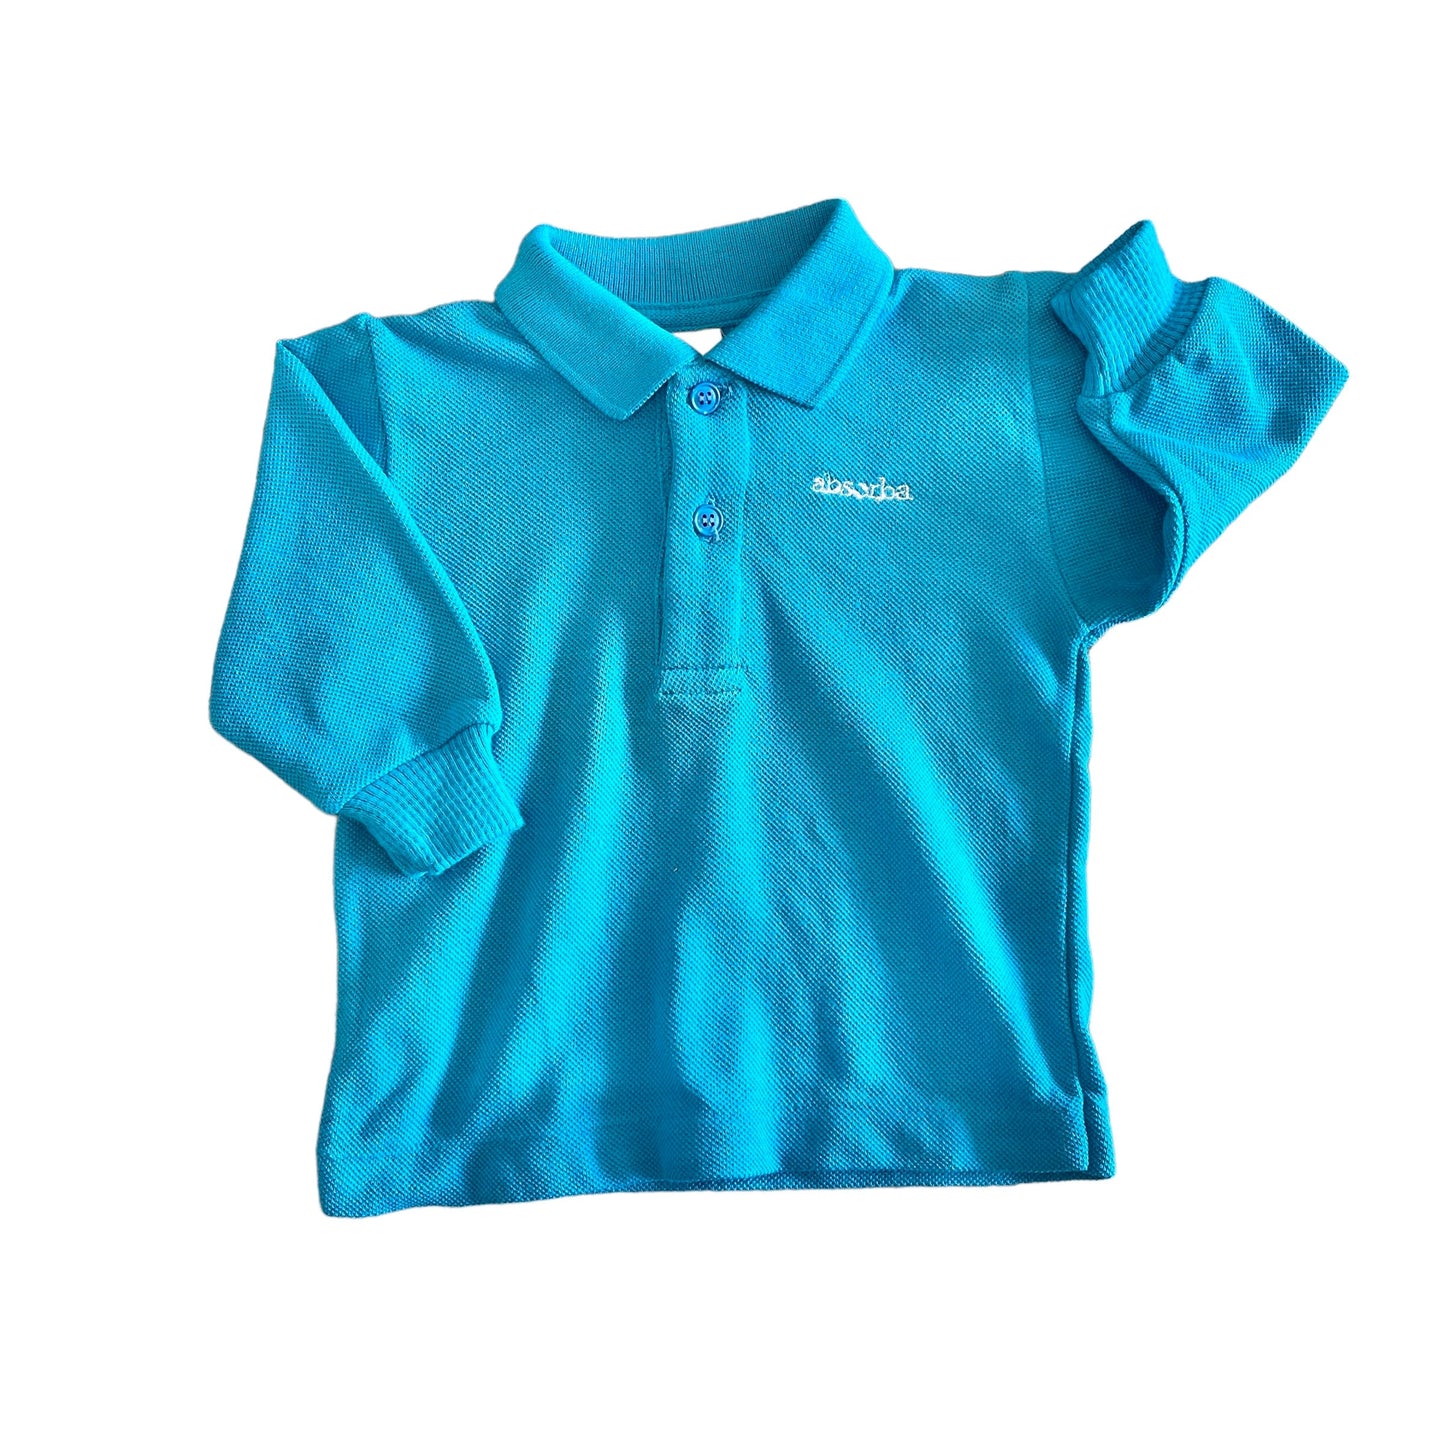 Vintage 70's Turquoise Polo / Top / 3-6 Months